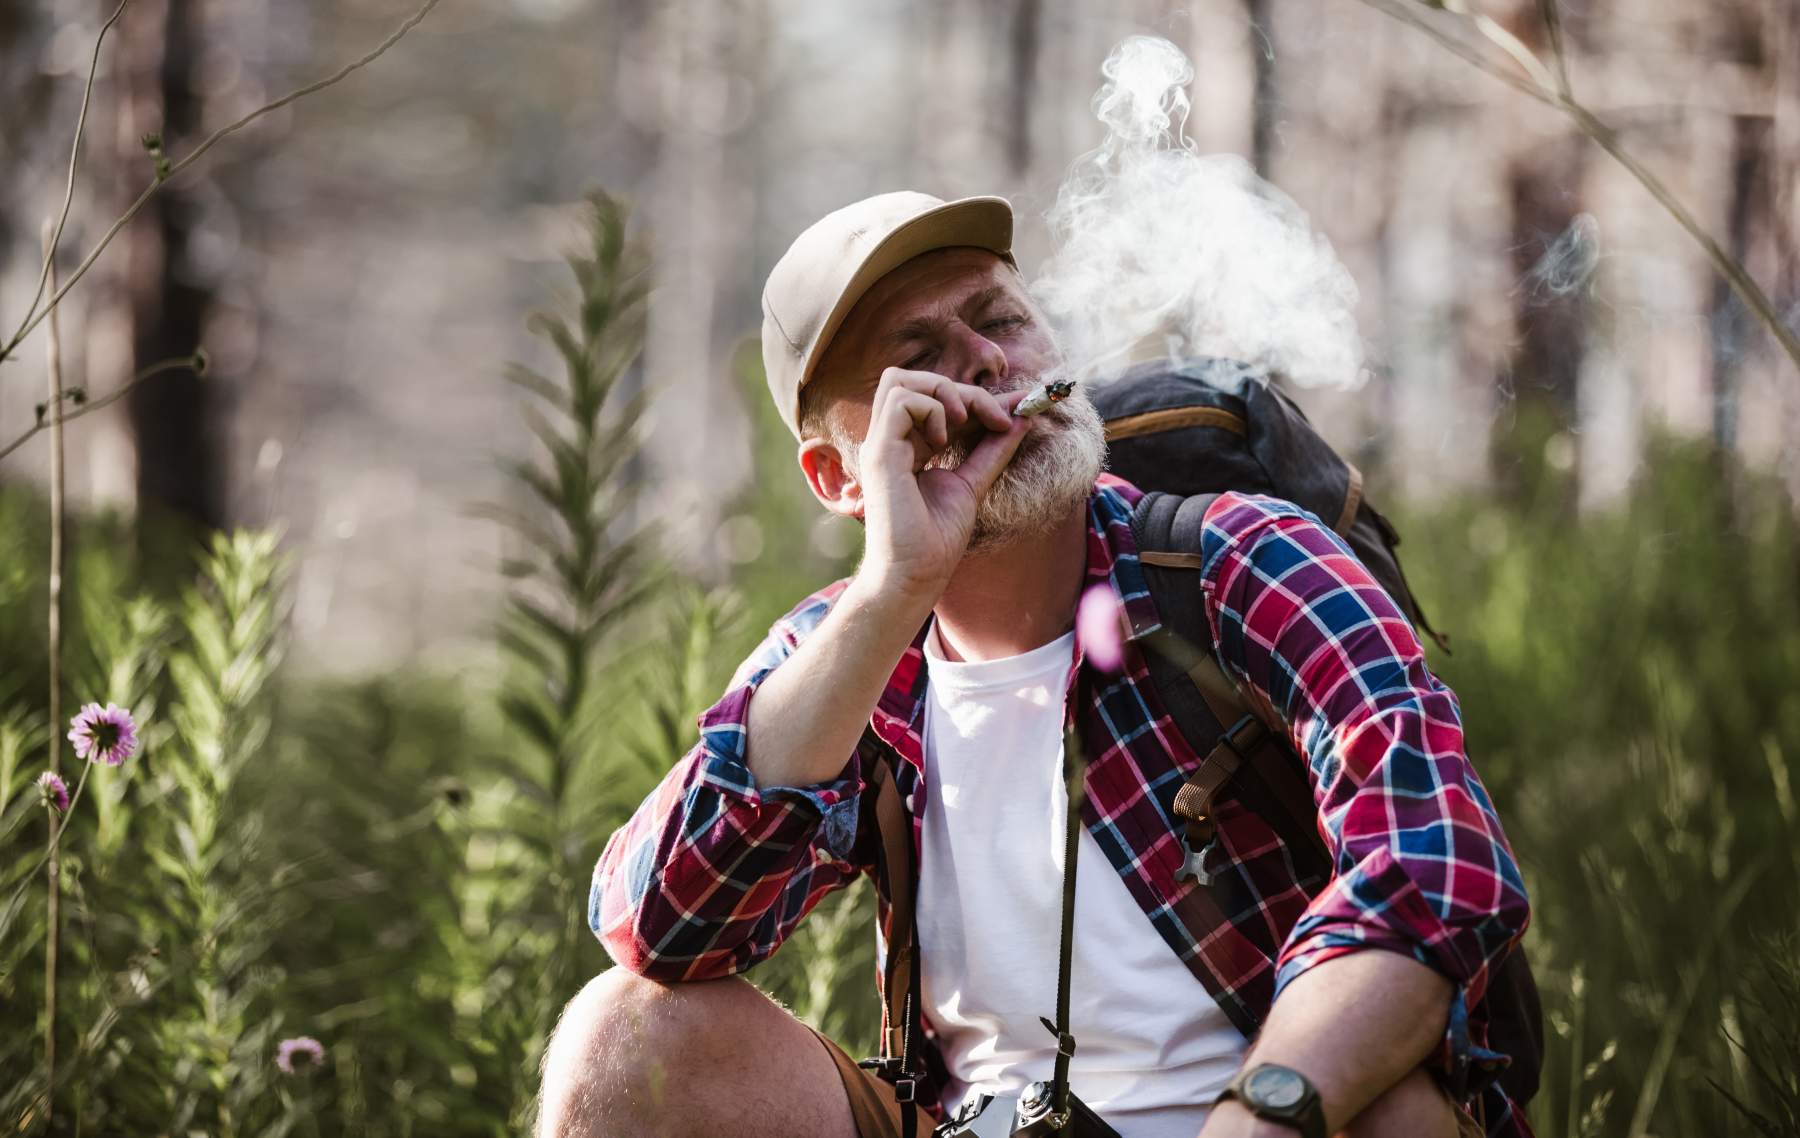 A person wearing a cap and plaid shirt is smoking while crouching in a forest. They have a backpack and a camera around their neck. Smoke is visible in the air.